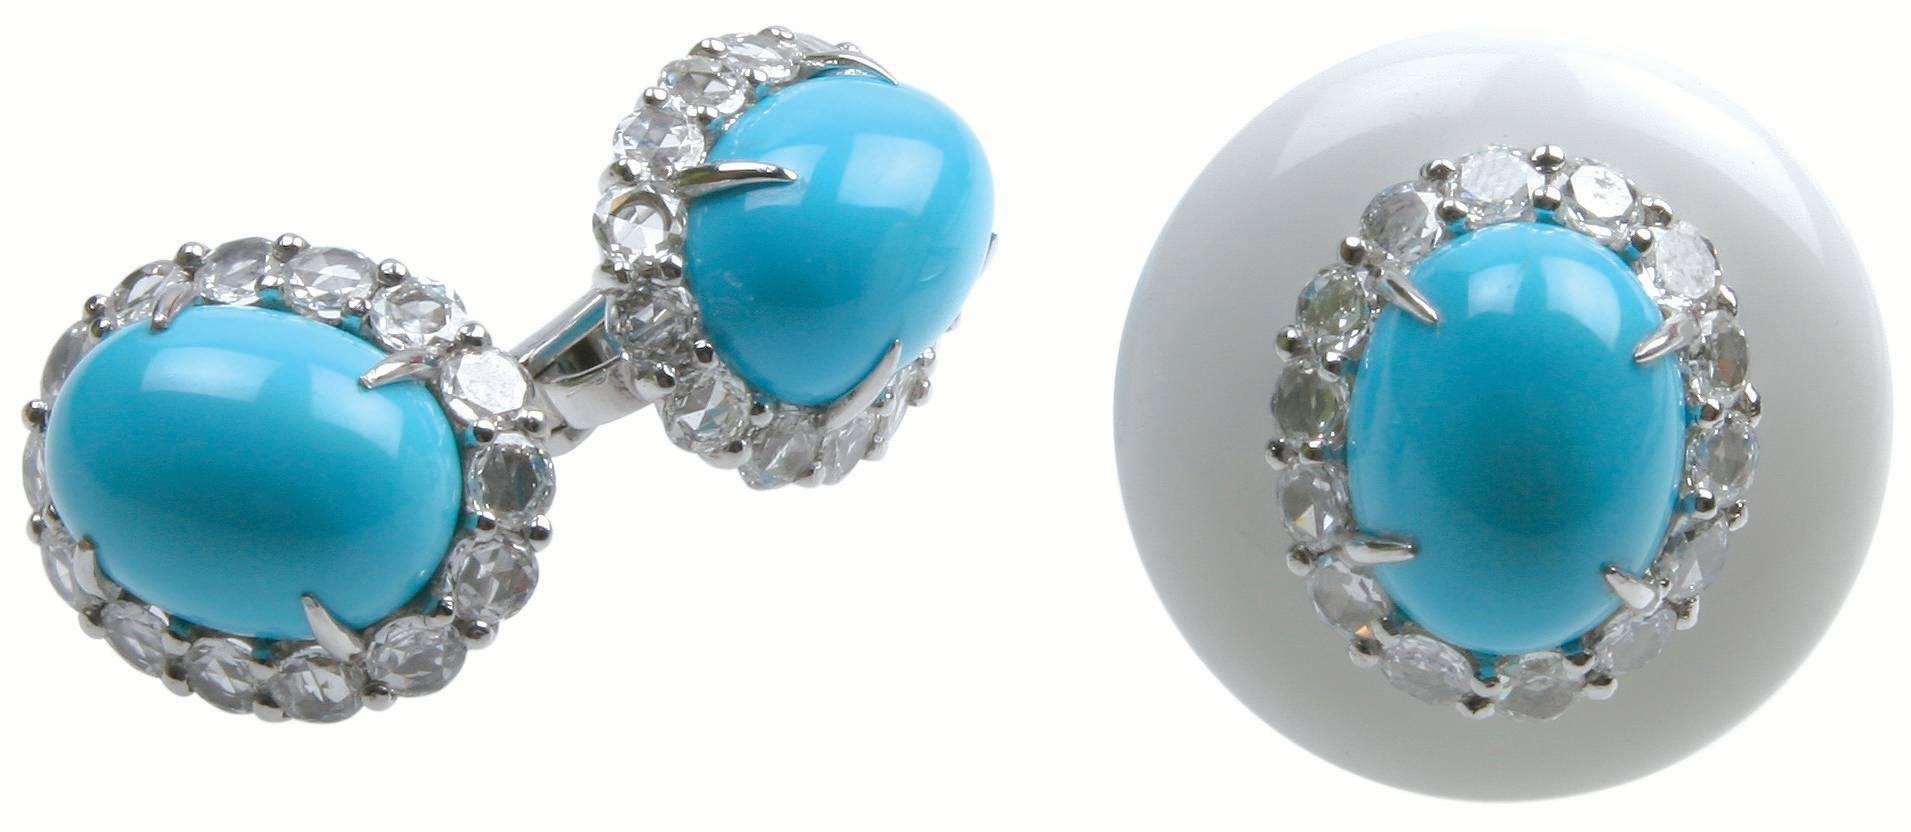 Metal: 18K White Gold
Precious Stones: Turquoise, Diamonds (3.6ct, 28 pieces)
Please allow for slight variations in measurements as pieces are handmade.
 
CAPRI COLLECTION © 2004
Reflecting the vibrancy of the Mediterranean islands and its